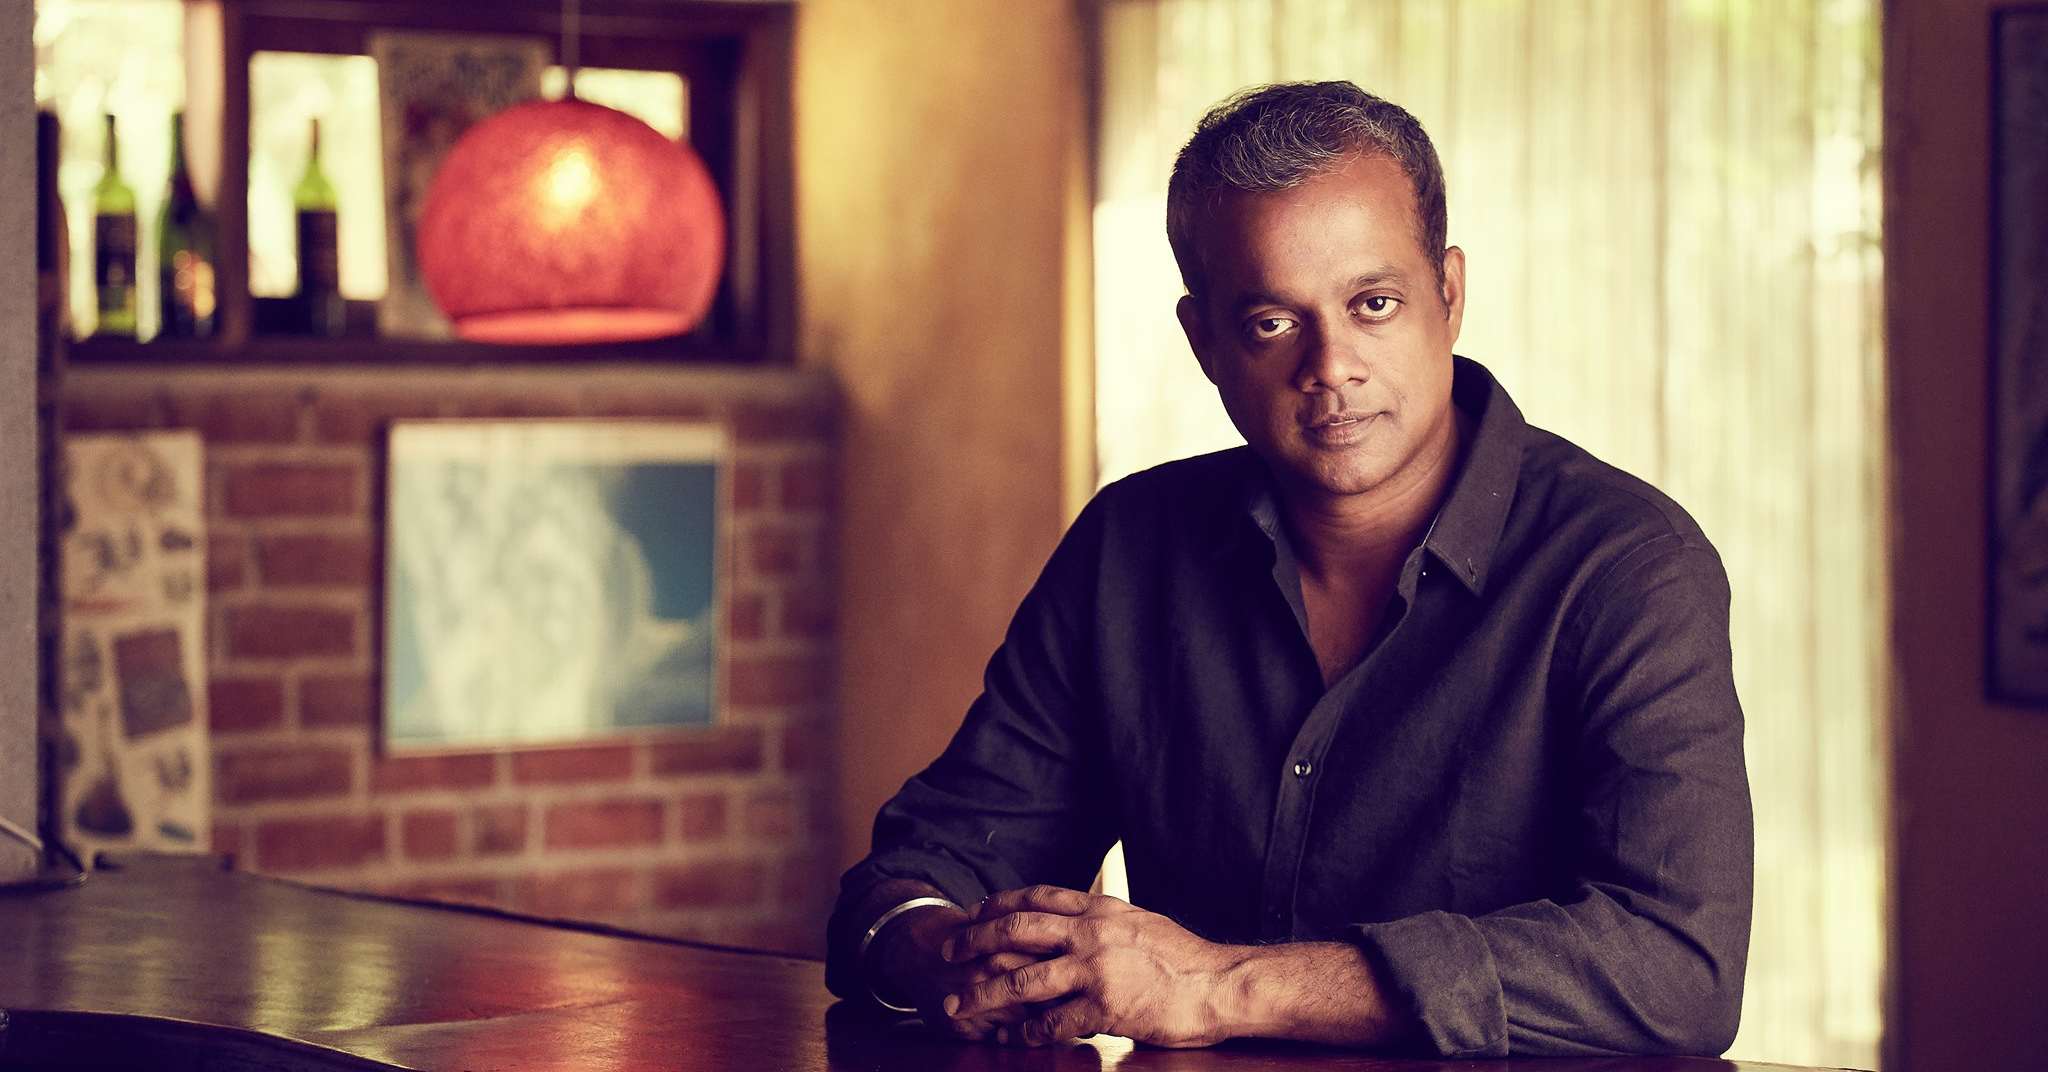 â€œitâ€™s Been A Long Time I Laughed Out From Bottom Of Heartâ€ â€“ Gvmâ€™s Emotional Speech